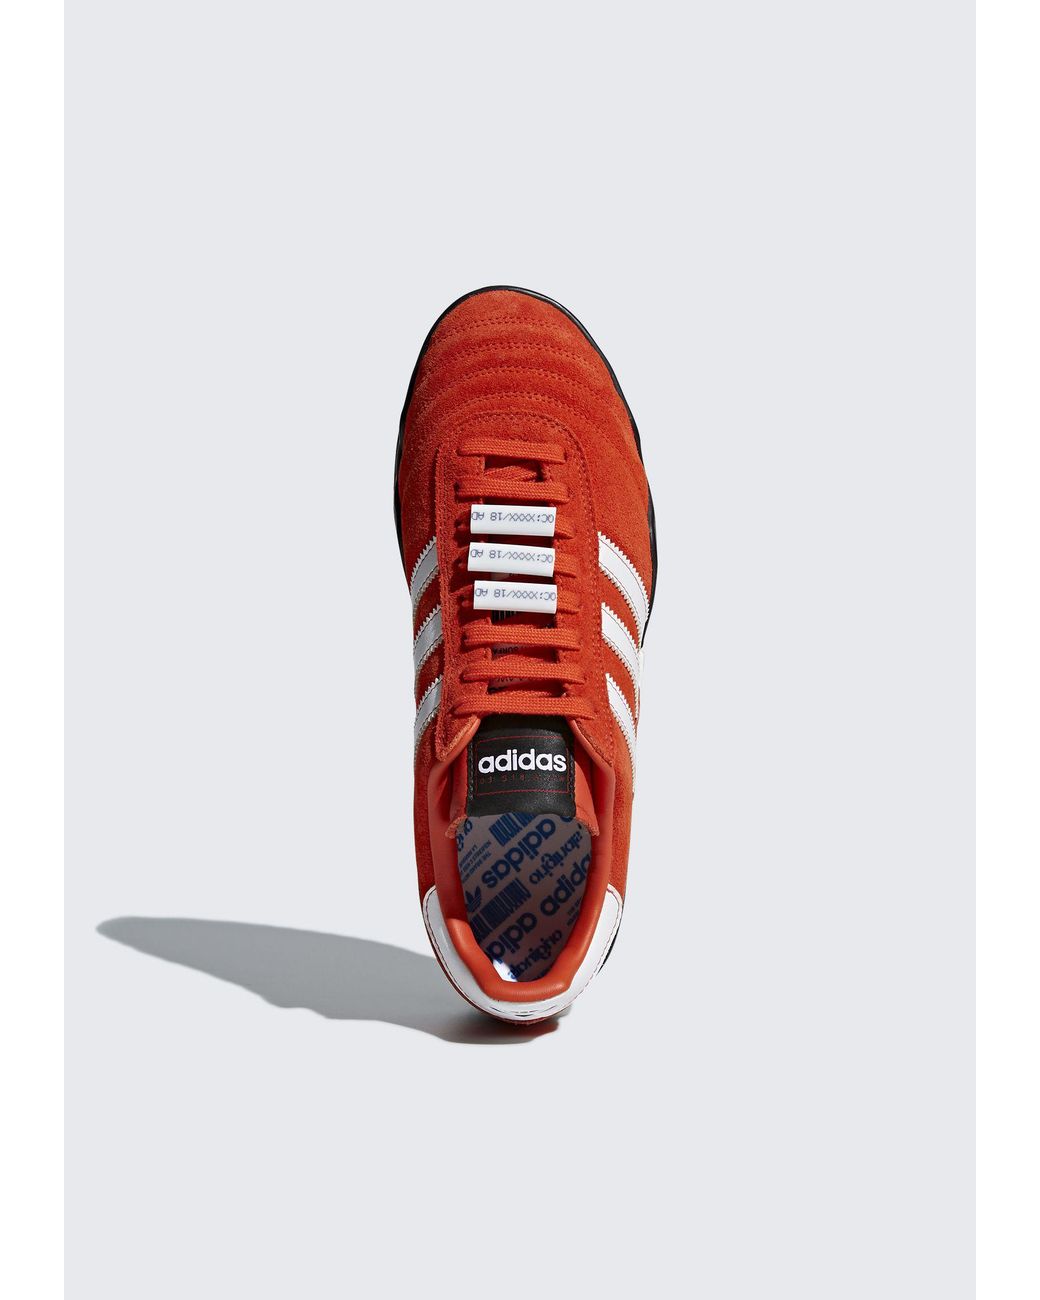 Alexander Wang Suede Adidas Originals By Aw Bball Soccer Shoes in Red | Lyst